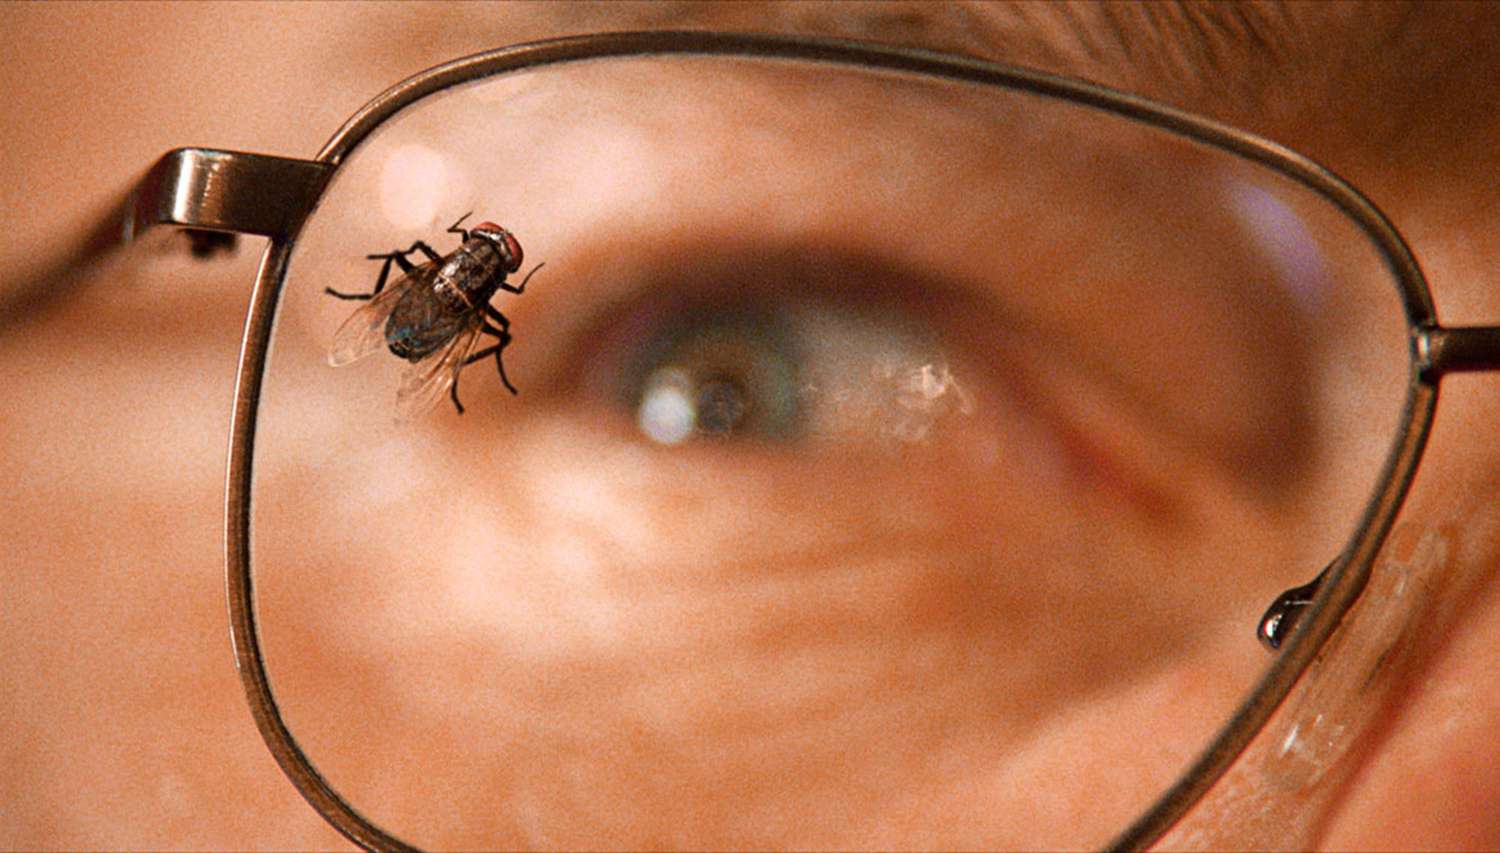 Breaking Bad, The Fly